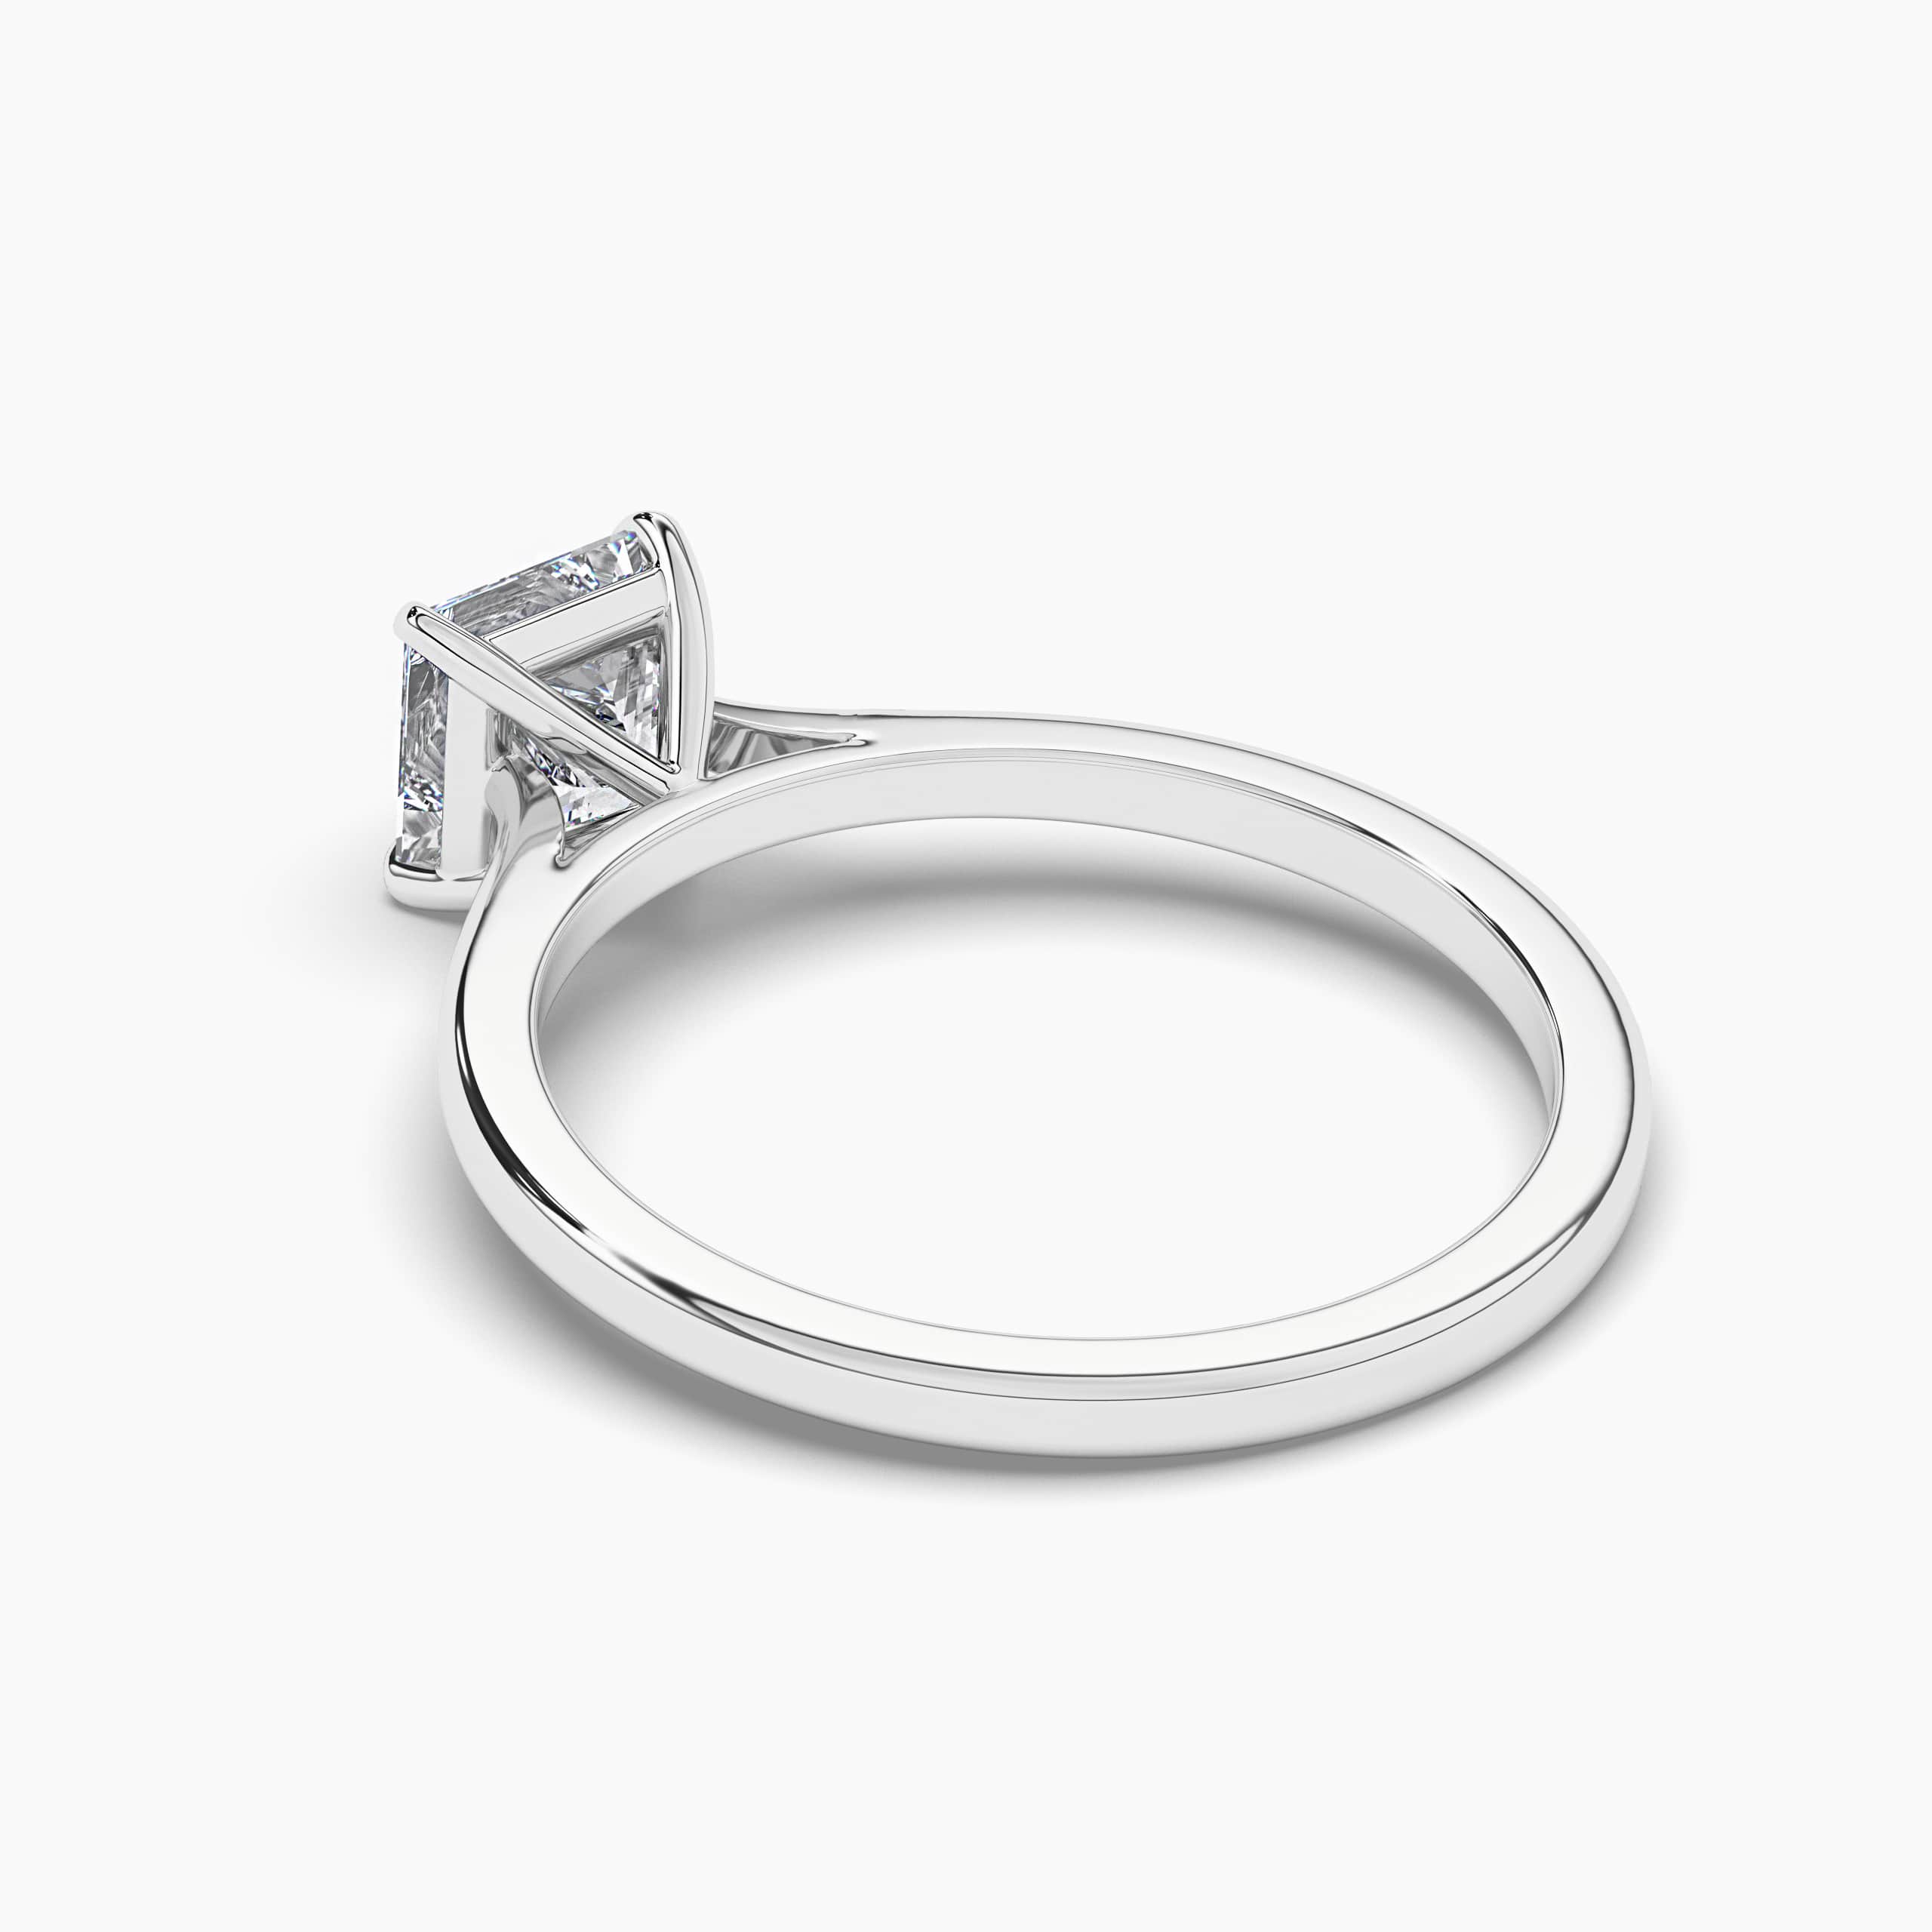 Princess Cut Diamond Solitaire Engagement Ring White Gold